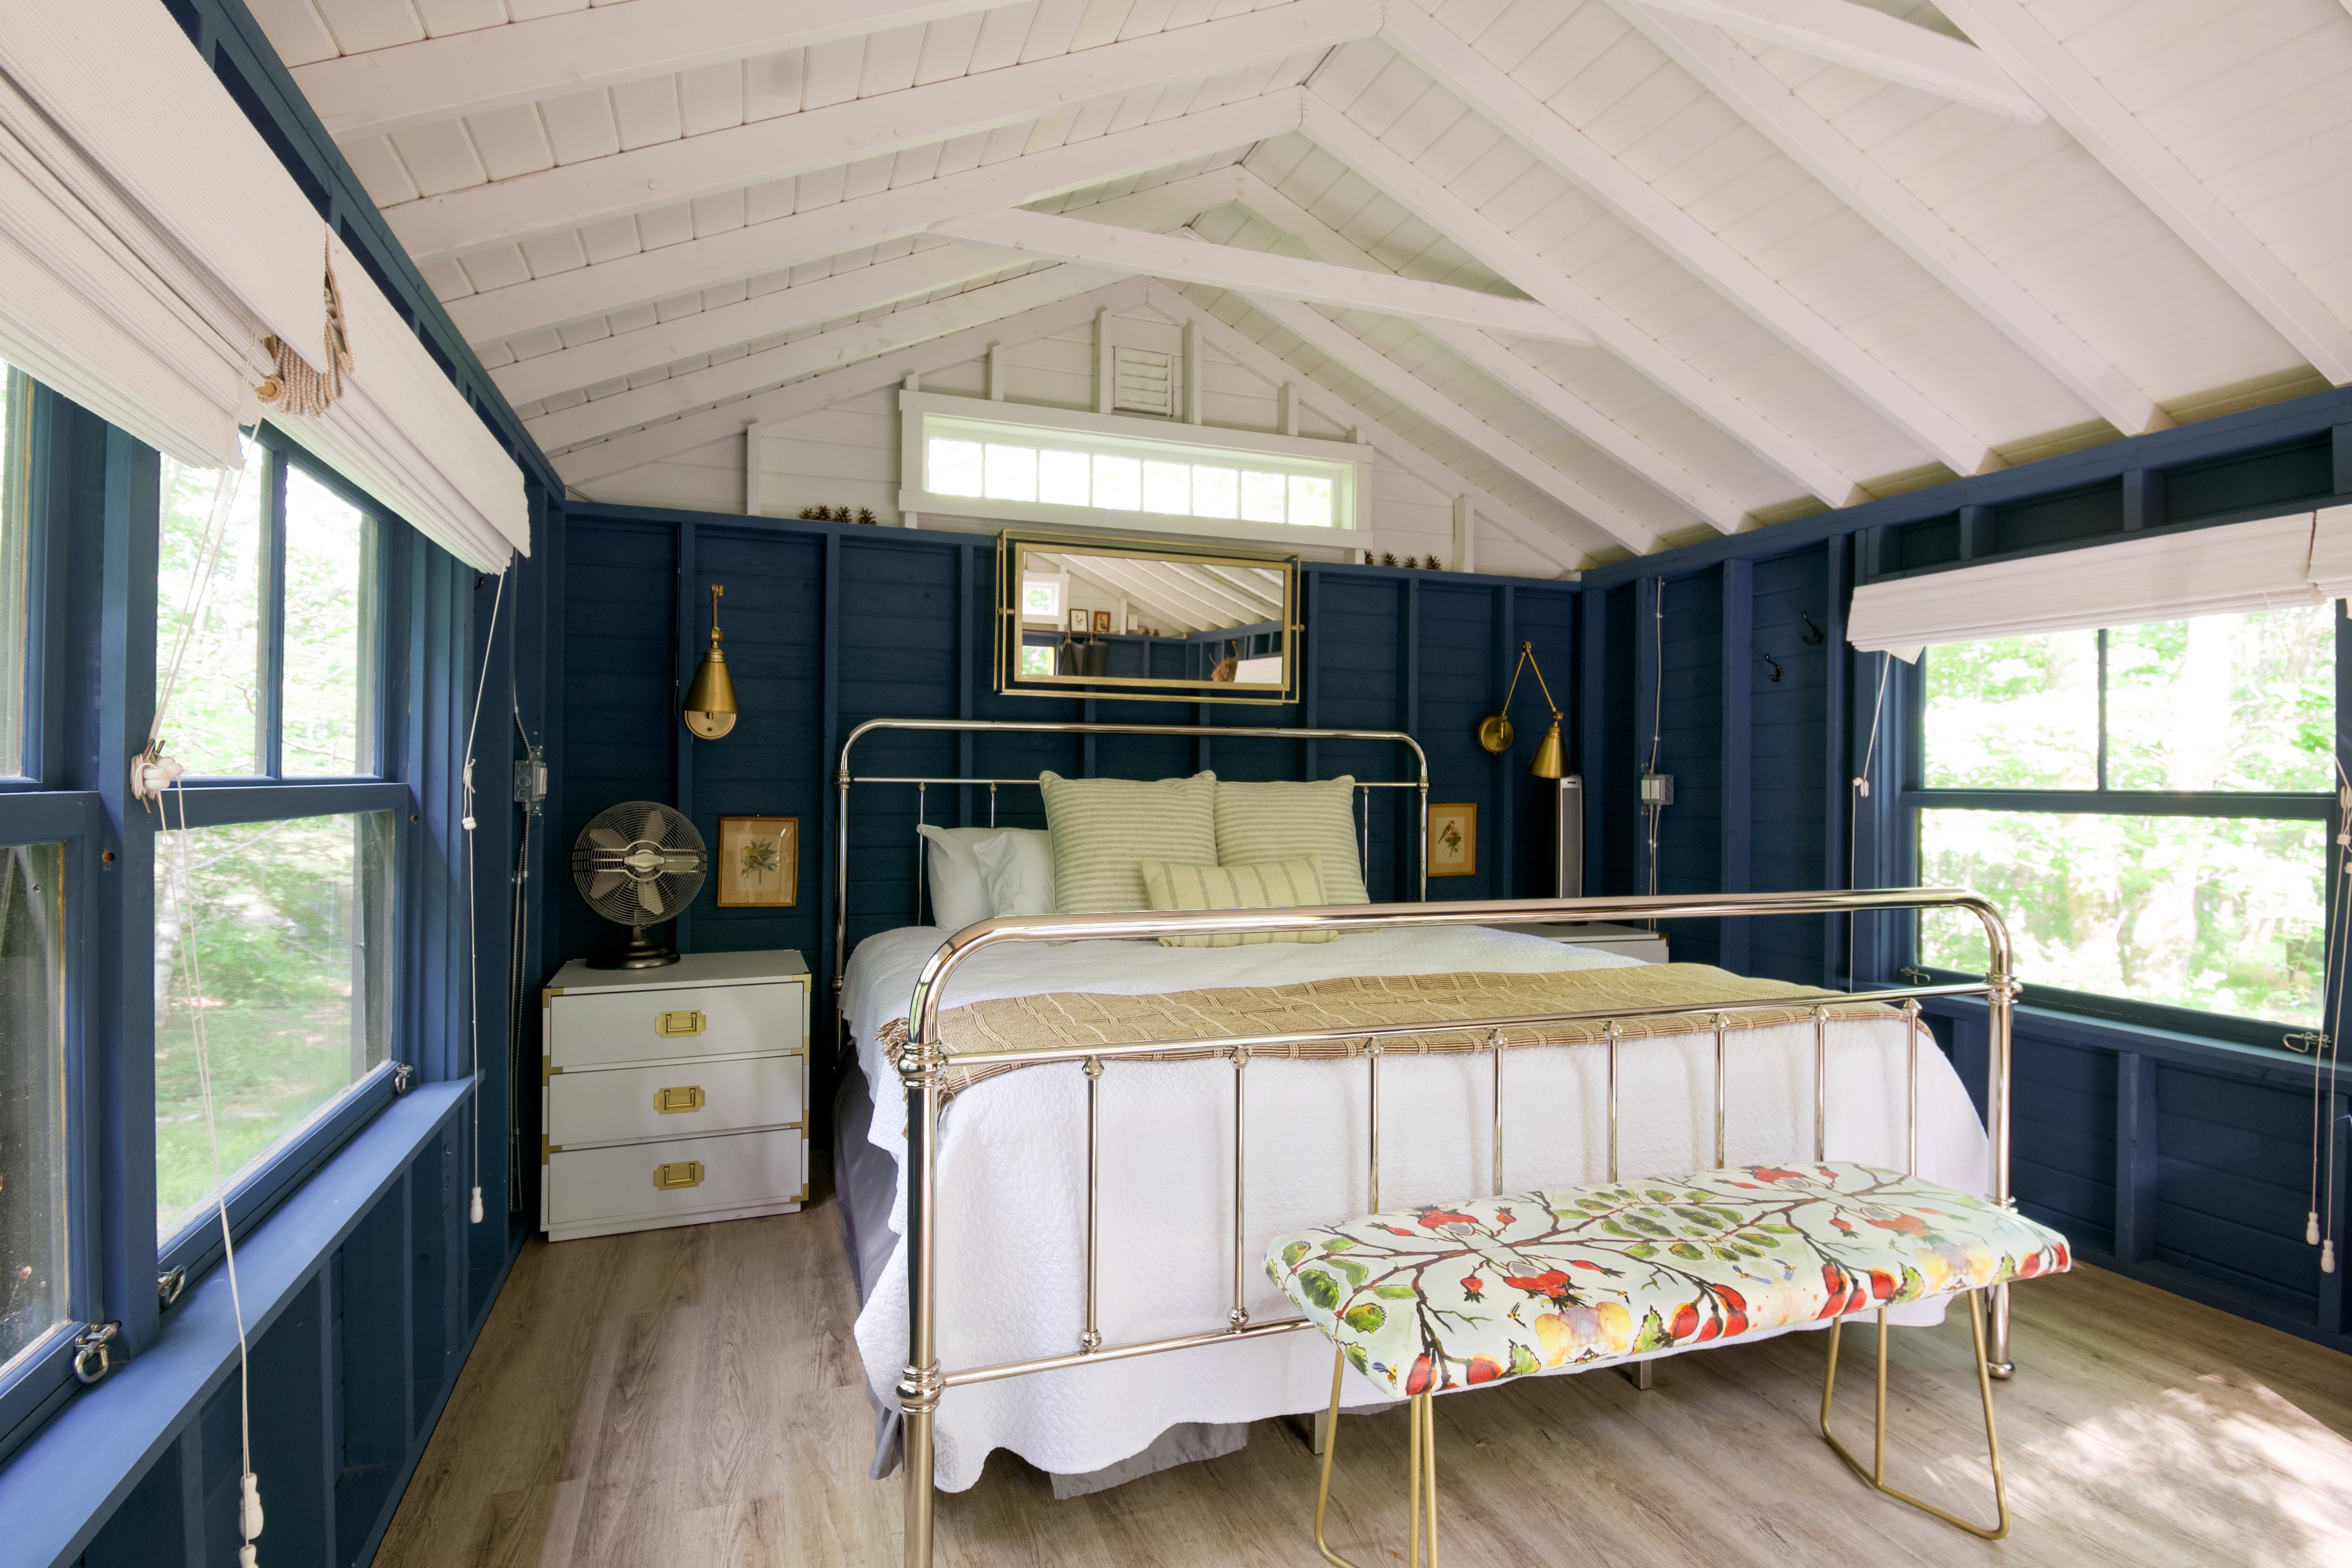 4 Essential Elements For Cottage-Style Bedroom Decor